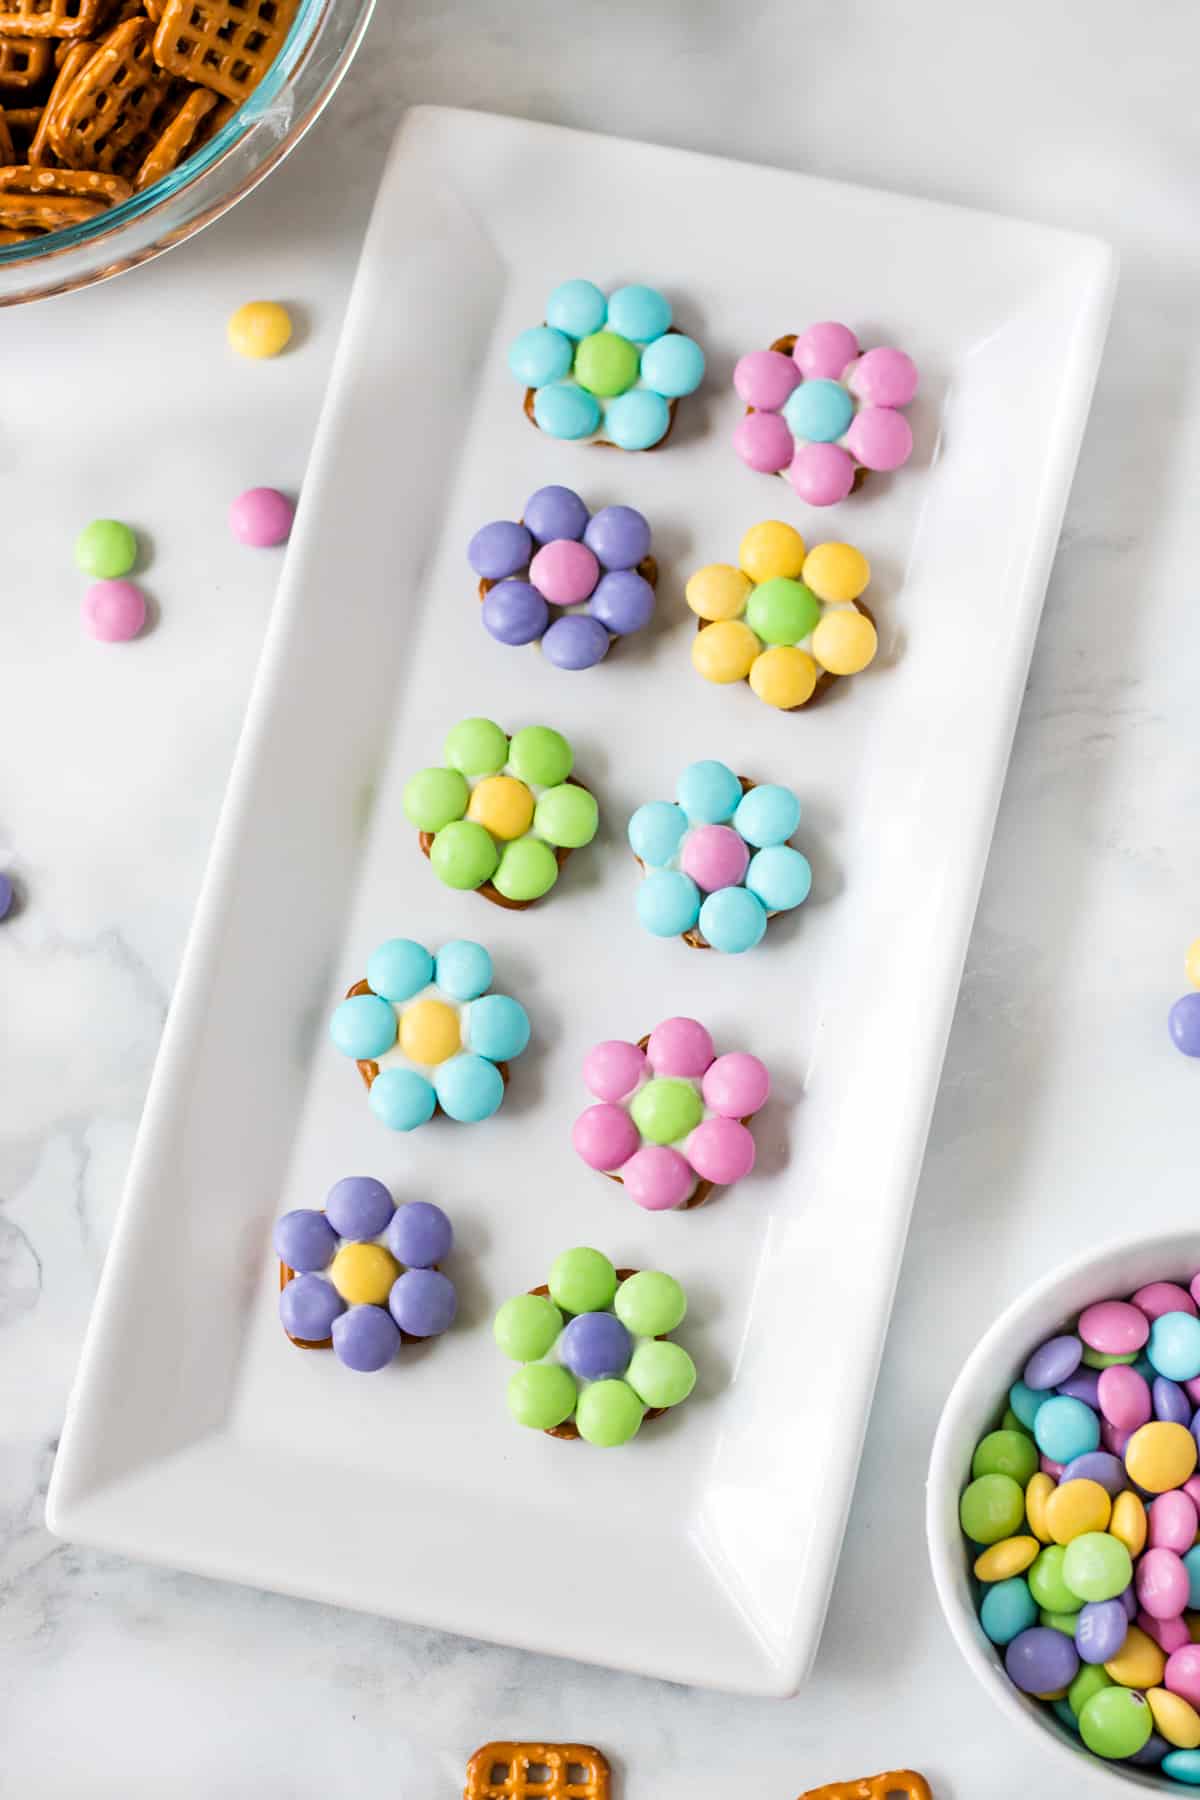 10 pastel-colored flowers made from M&Ms and pretzels on a white serving platter. A bowl of pretzel snaps and a bowl of M&Ms are next to the platter.